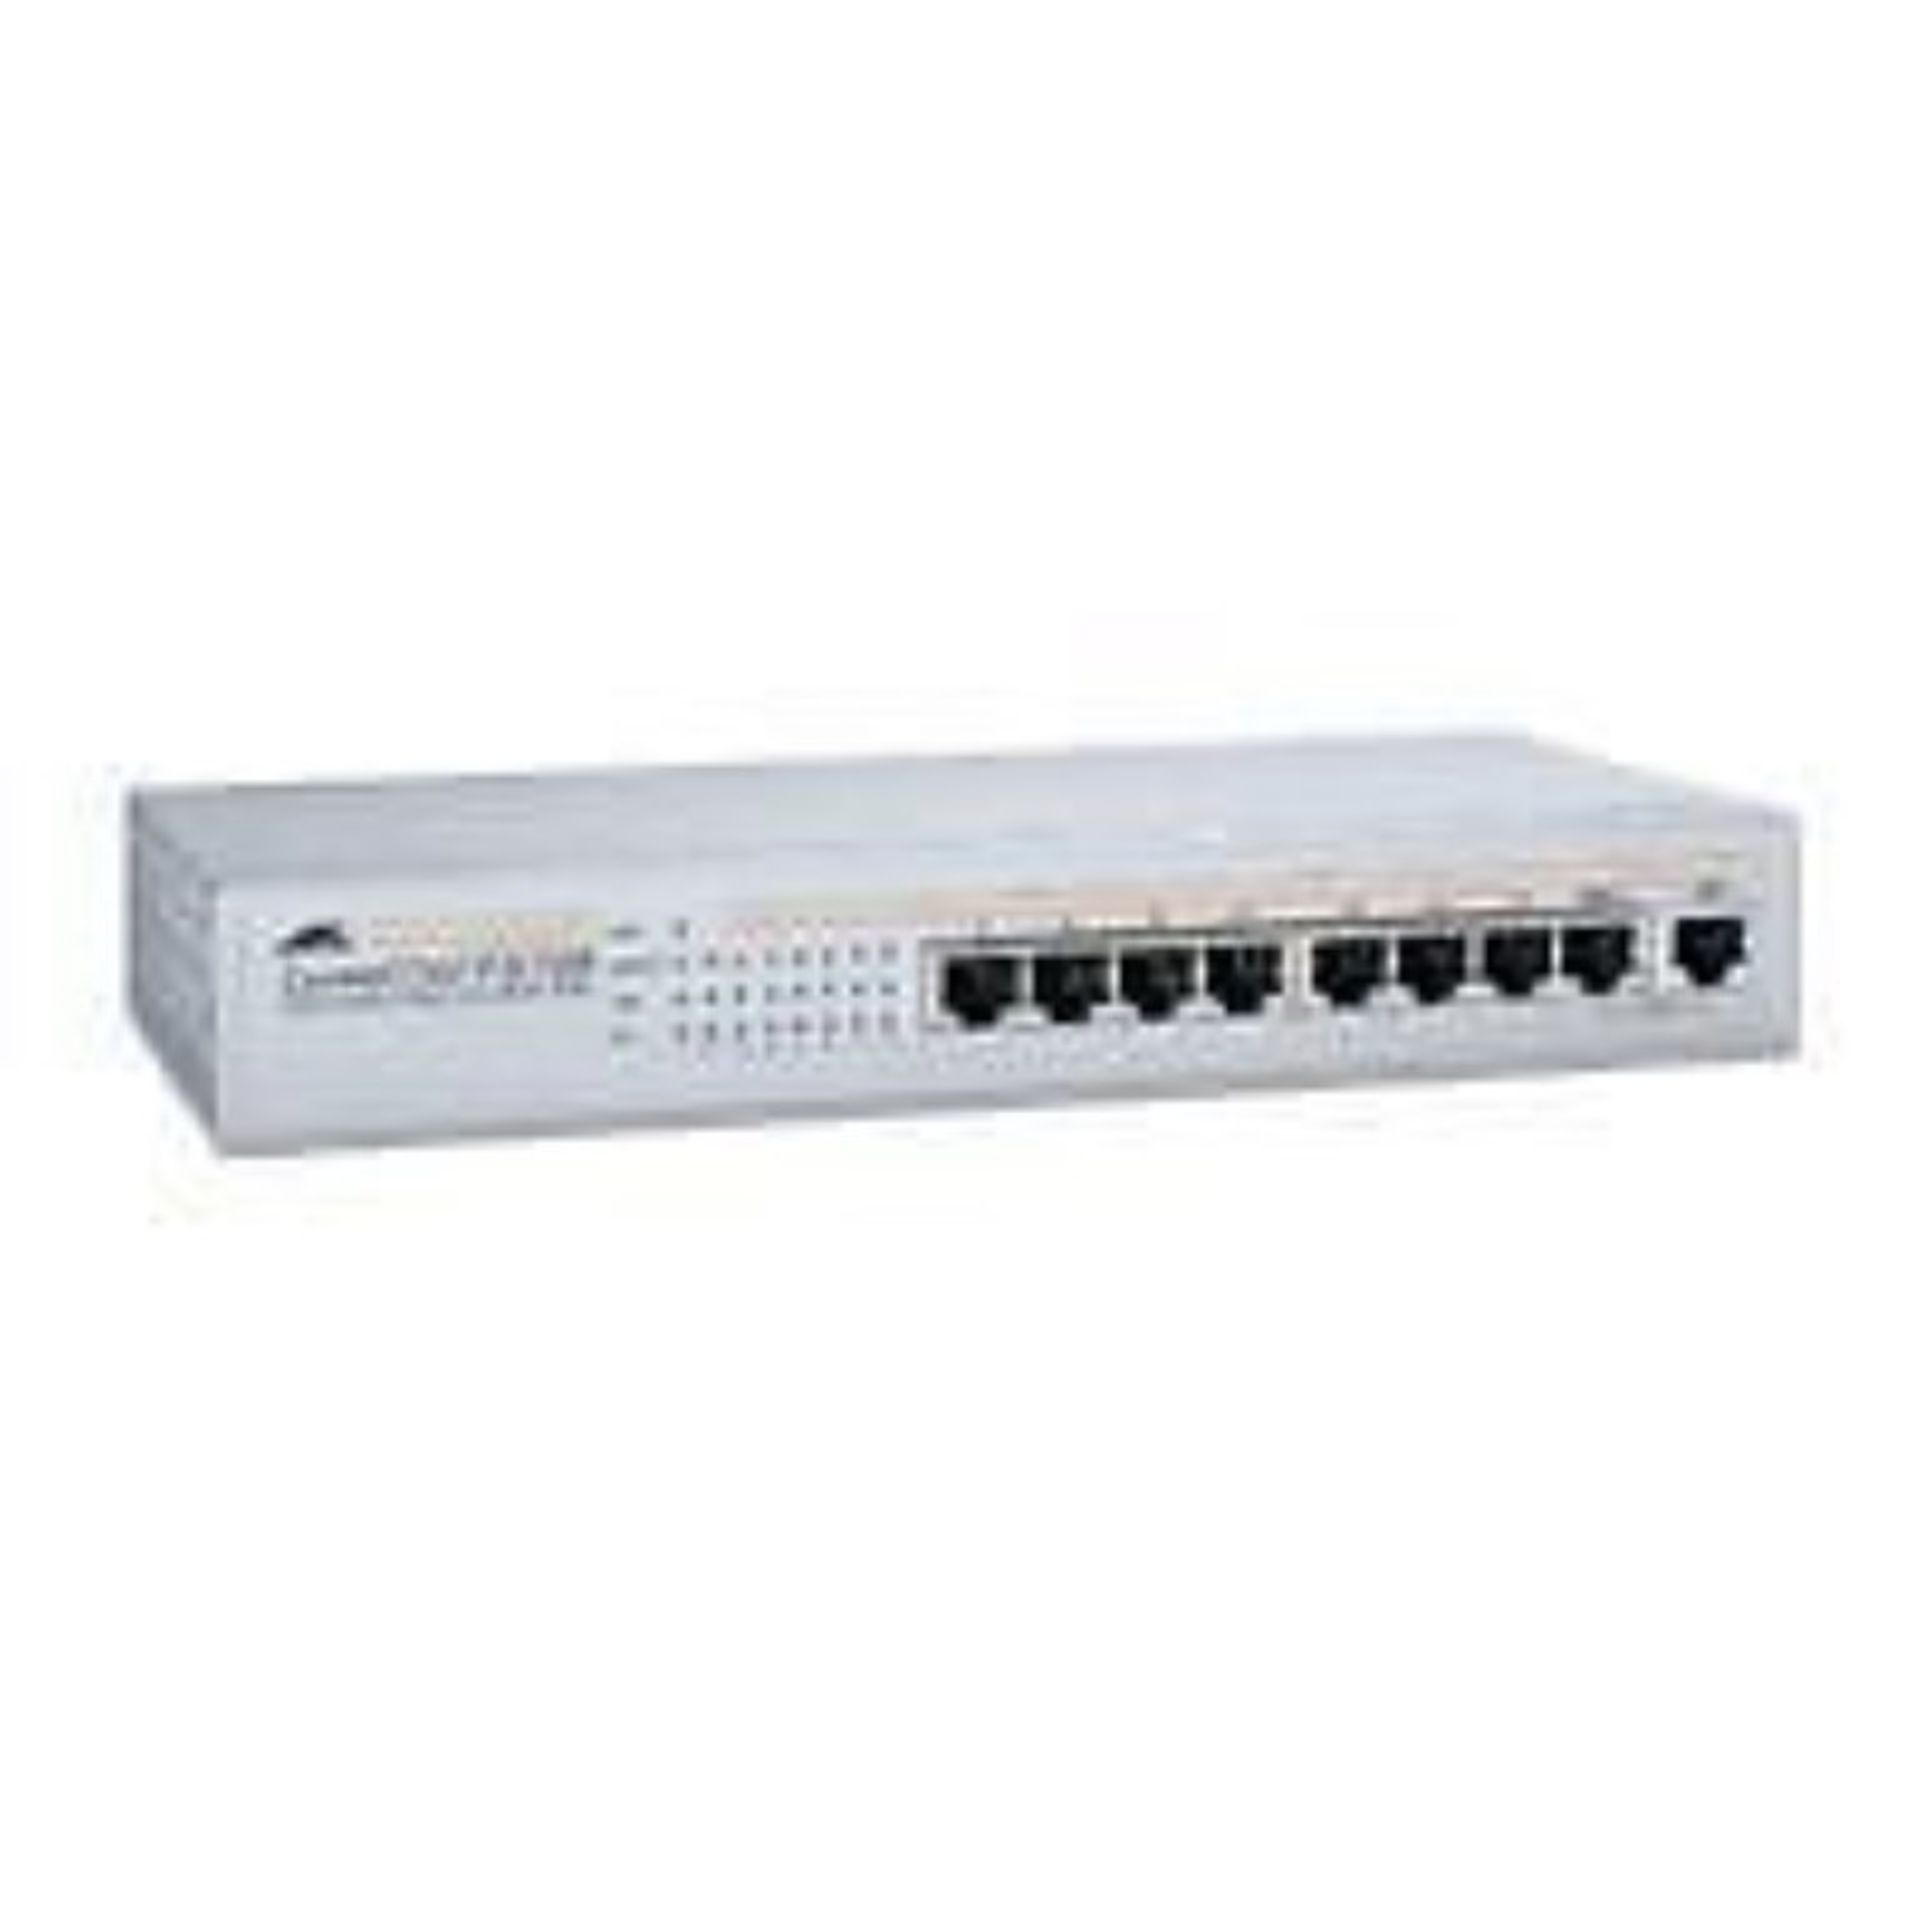 4 x AT-FS708 Allied Telesis 8 Port 10/100TX Unmanaged Layer 2 Switch - REF: MIT19 - Used and - Image 2 of 2